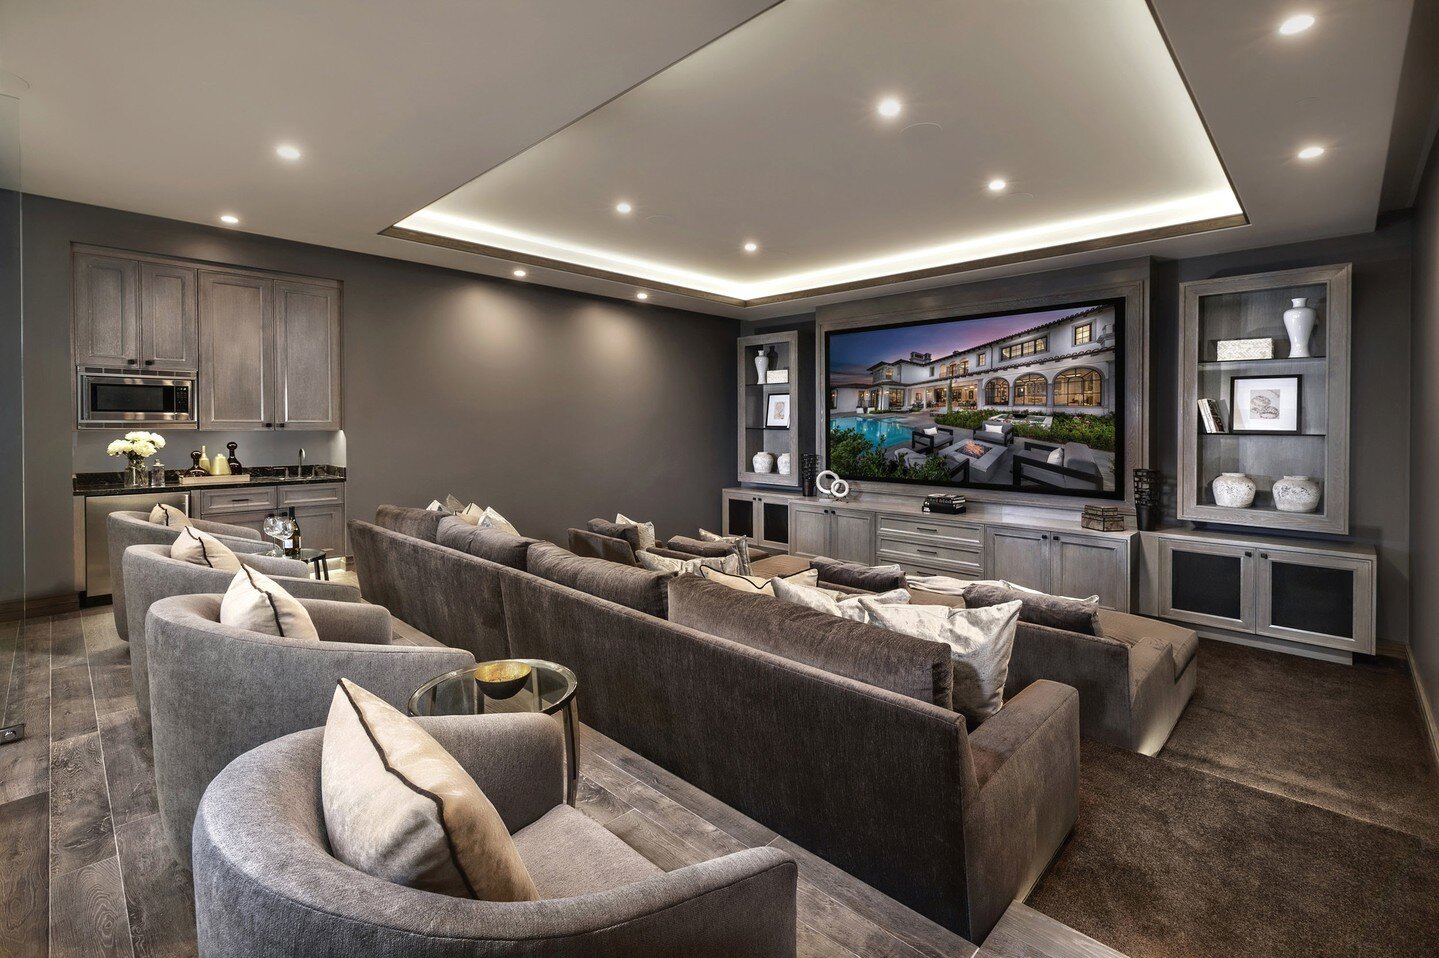 You can curl up in your very own private theater where they always play the perfect show on your schedule.  Interior Design: @smdainc Architect: @oatmanarchitects